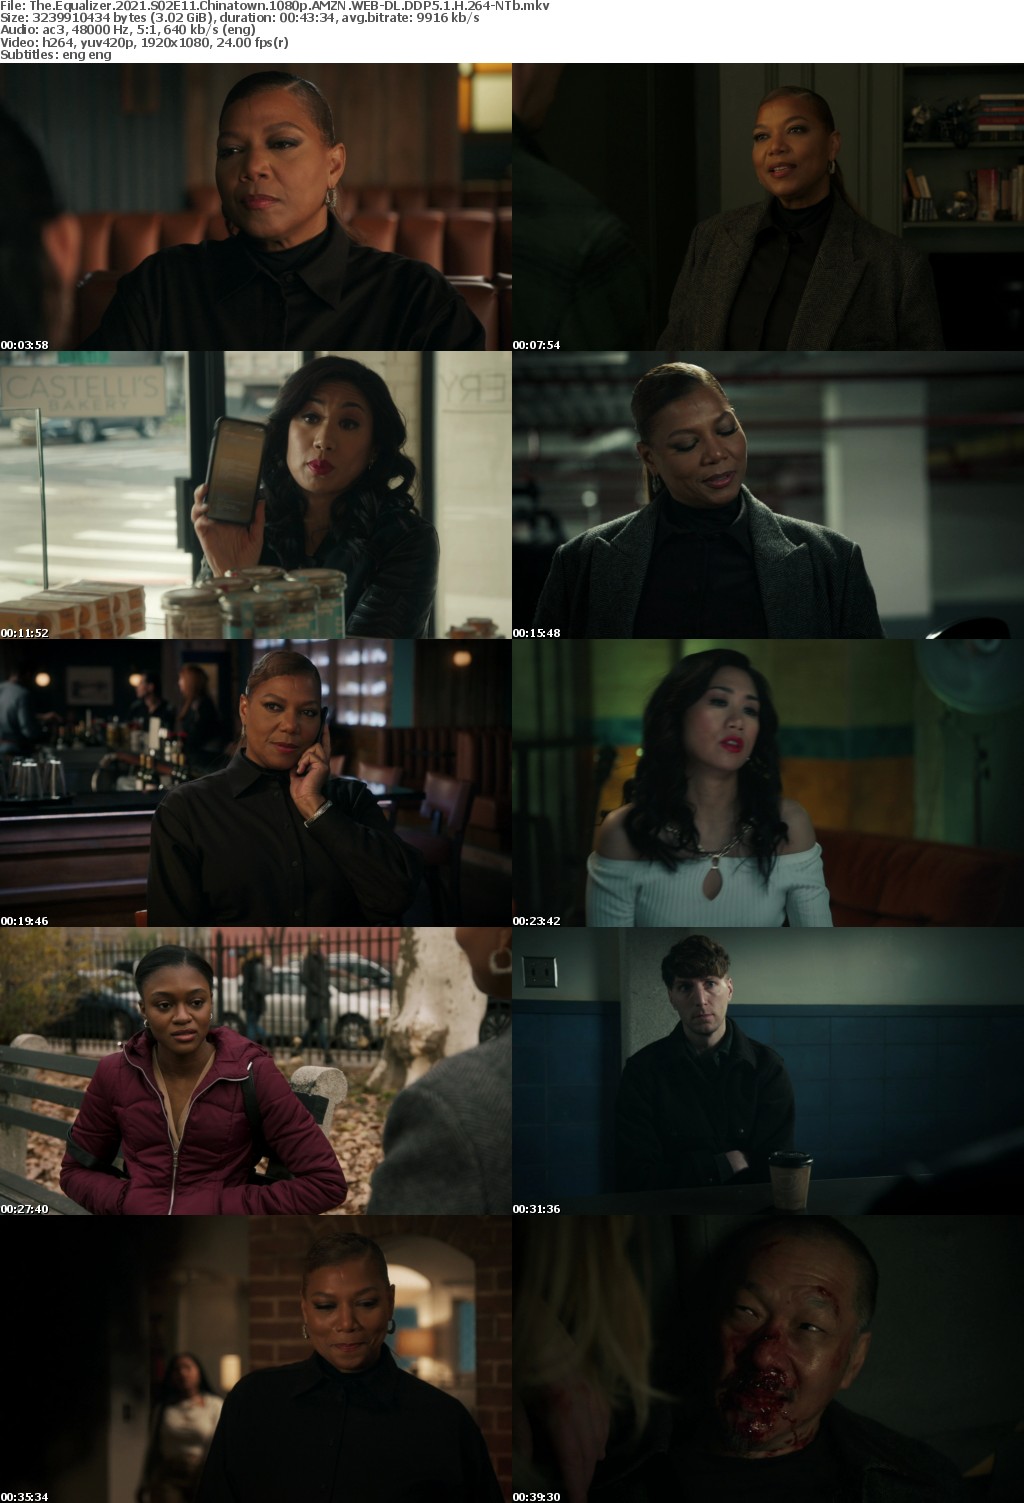 The Equalizer 2021 S02E11 Chinatown 1080p AMZN WEBRip DDP5 1 x264-NTb